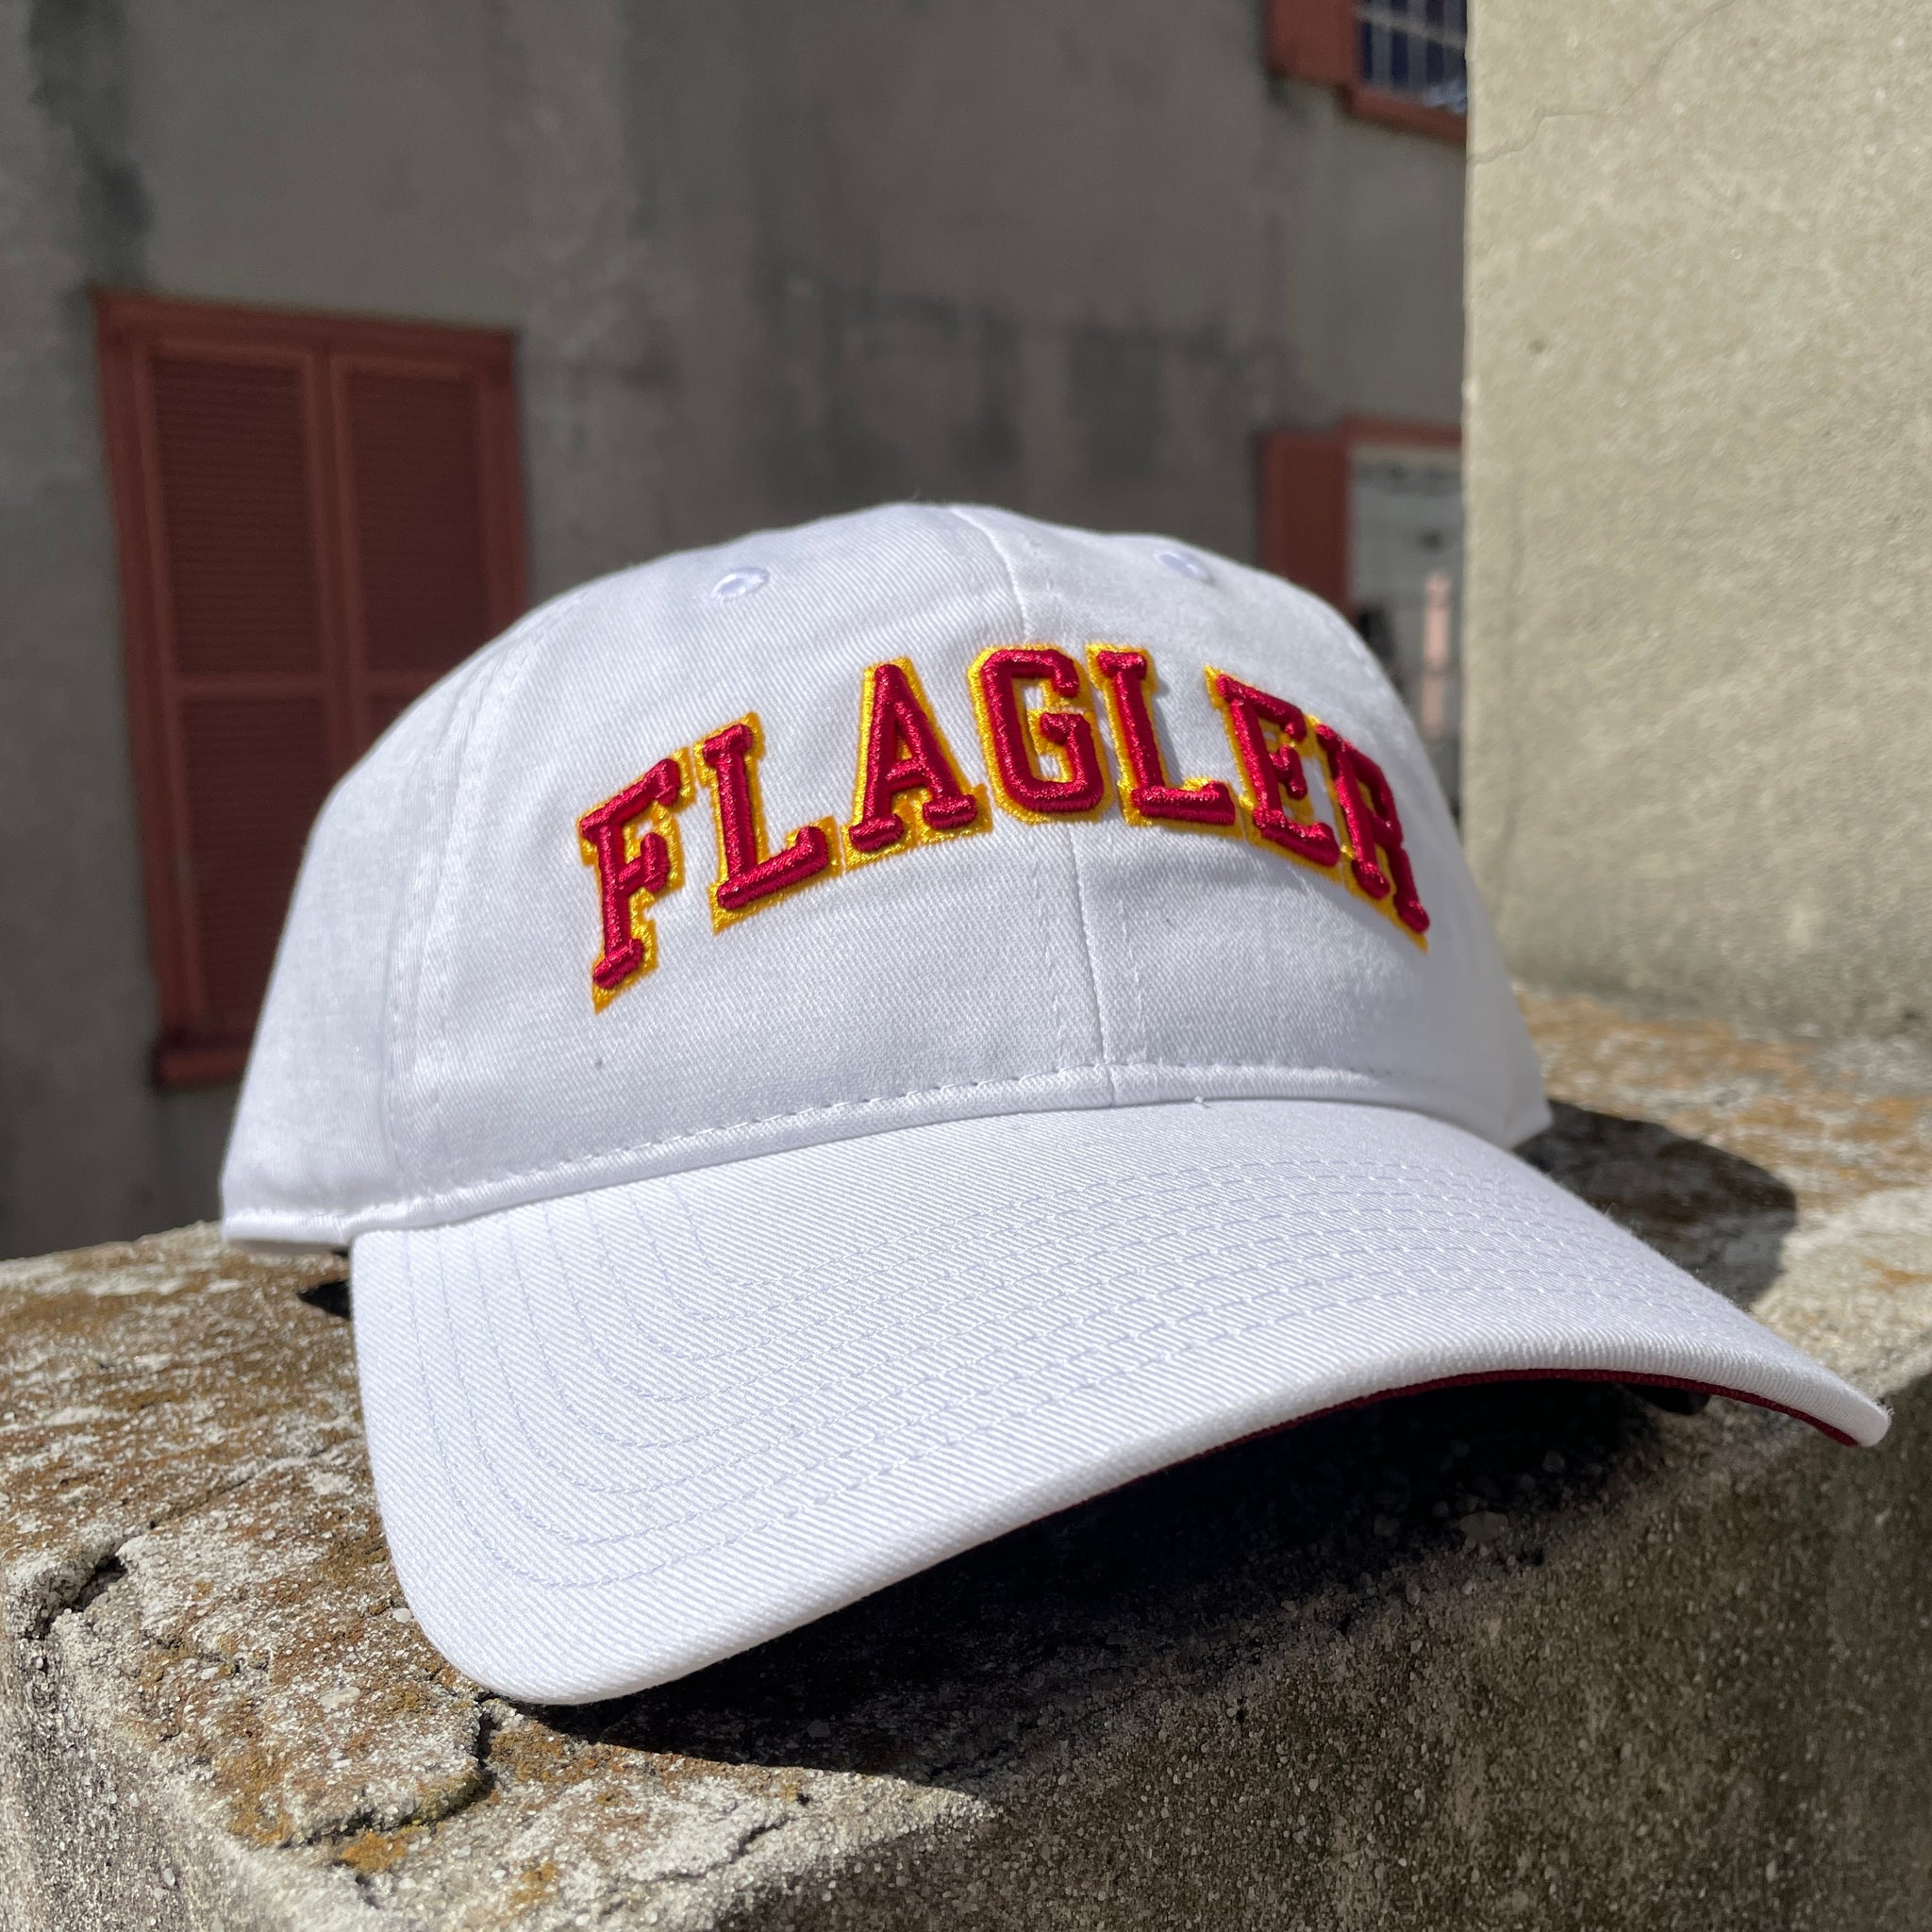  White hat with red letters saying Flagler.